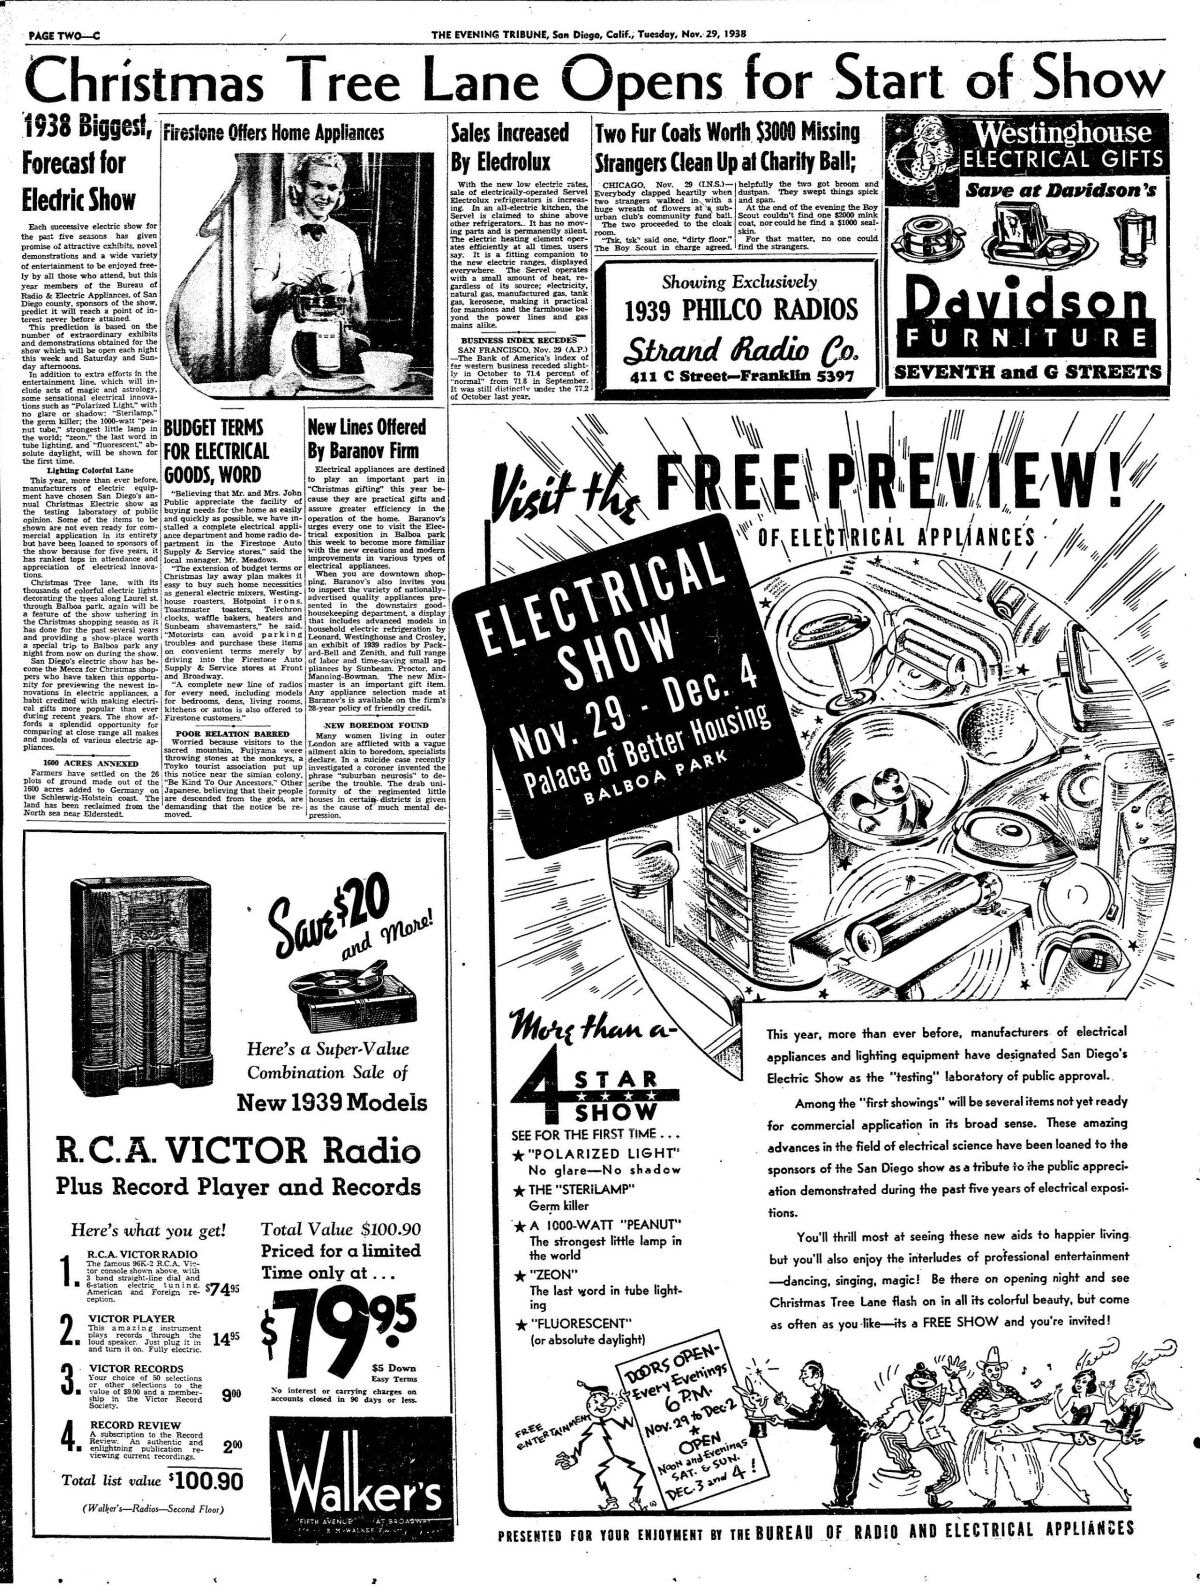 A preview of the Electrical Show in Balboa Park from the Evening Triibune, Tuesday, Nov. 29, 1938.